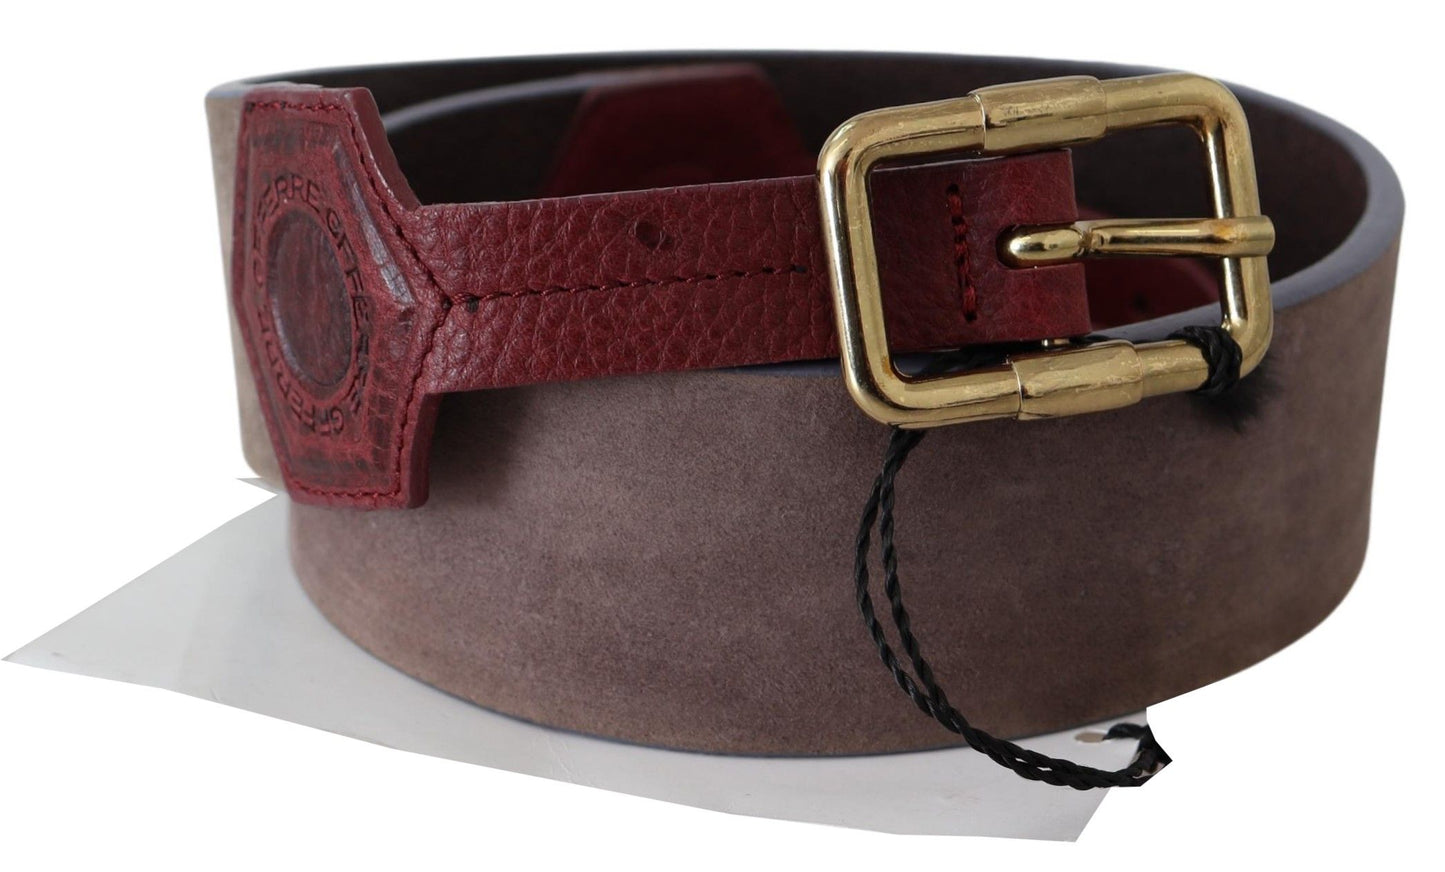 GF Ferre Elegant Brown Leather Belt with Gold Buckle